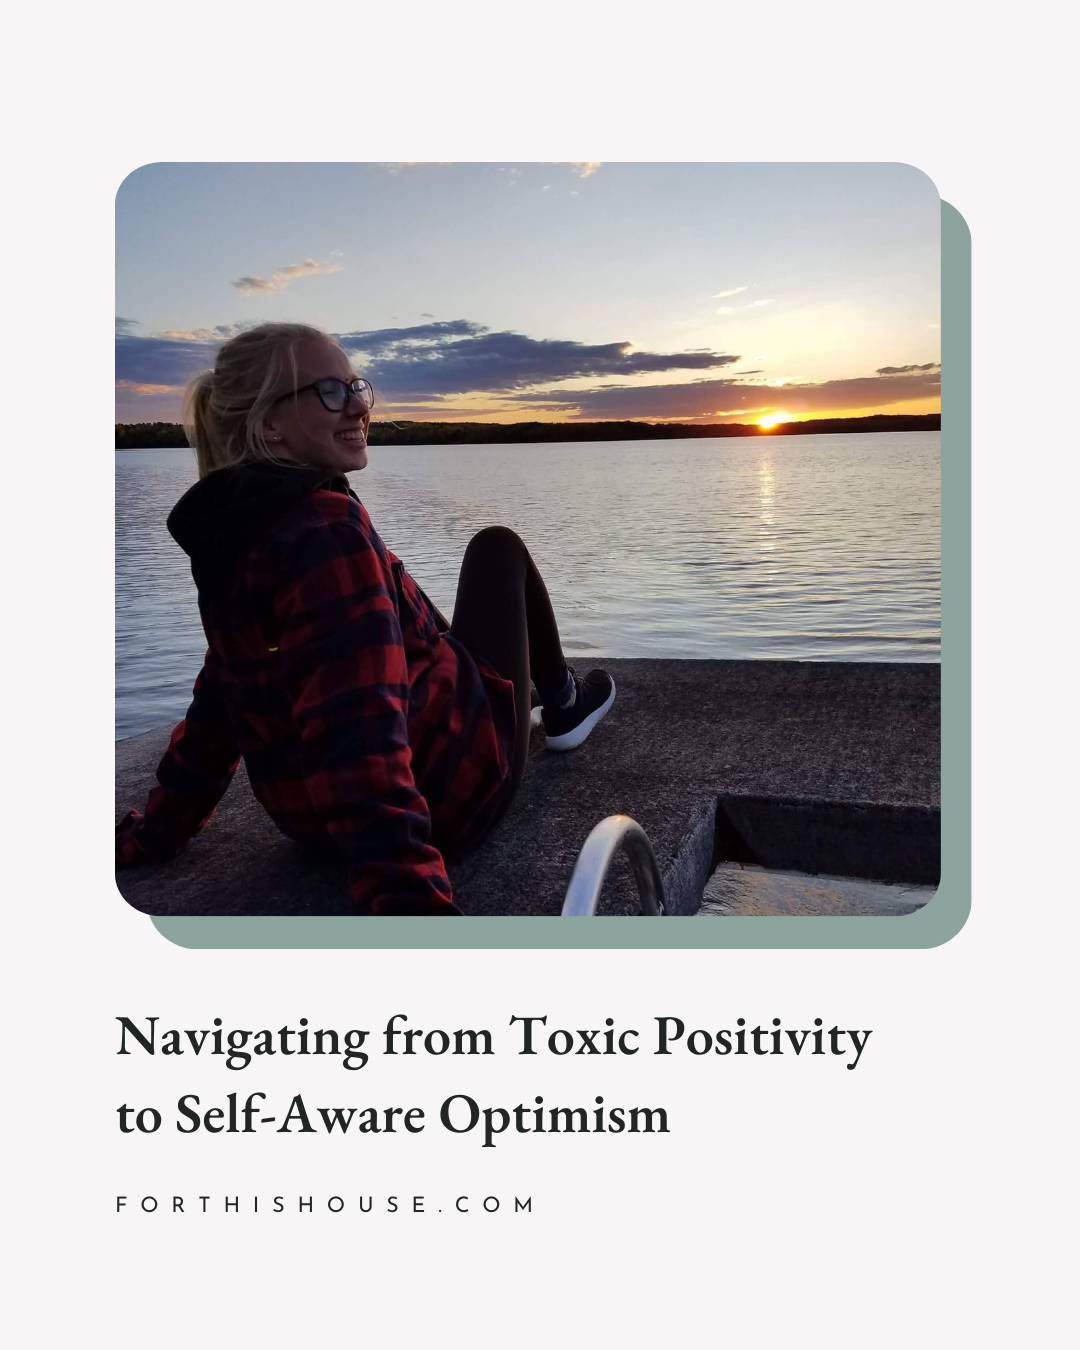 Navigating from toxic positivity to self-aware optimism